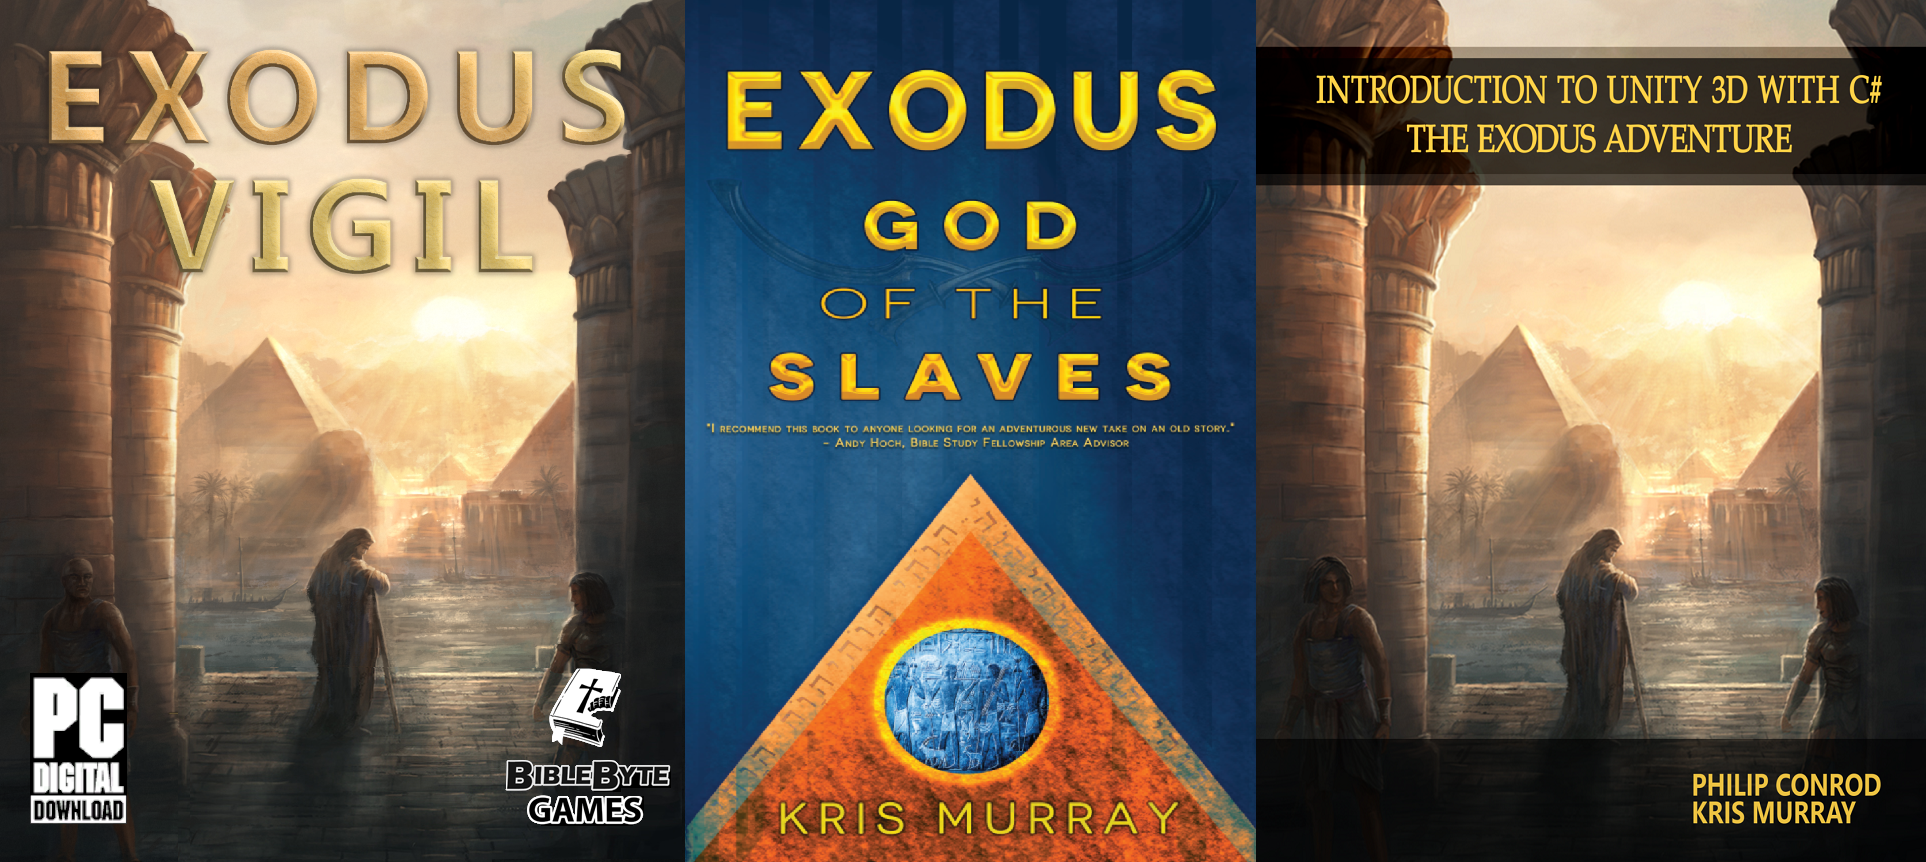 Exodus Vigil PC Game – Episode #1 Bundled with the Introduction to Unity 3D Using C#: Exodus Adventure Game Design and Development Tutorial textbook